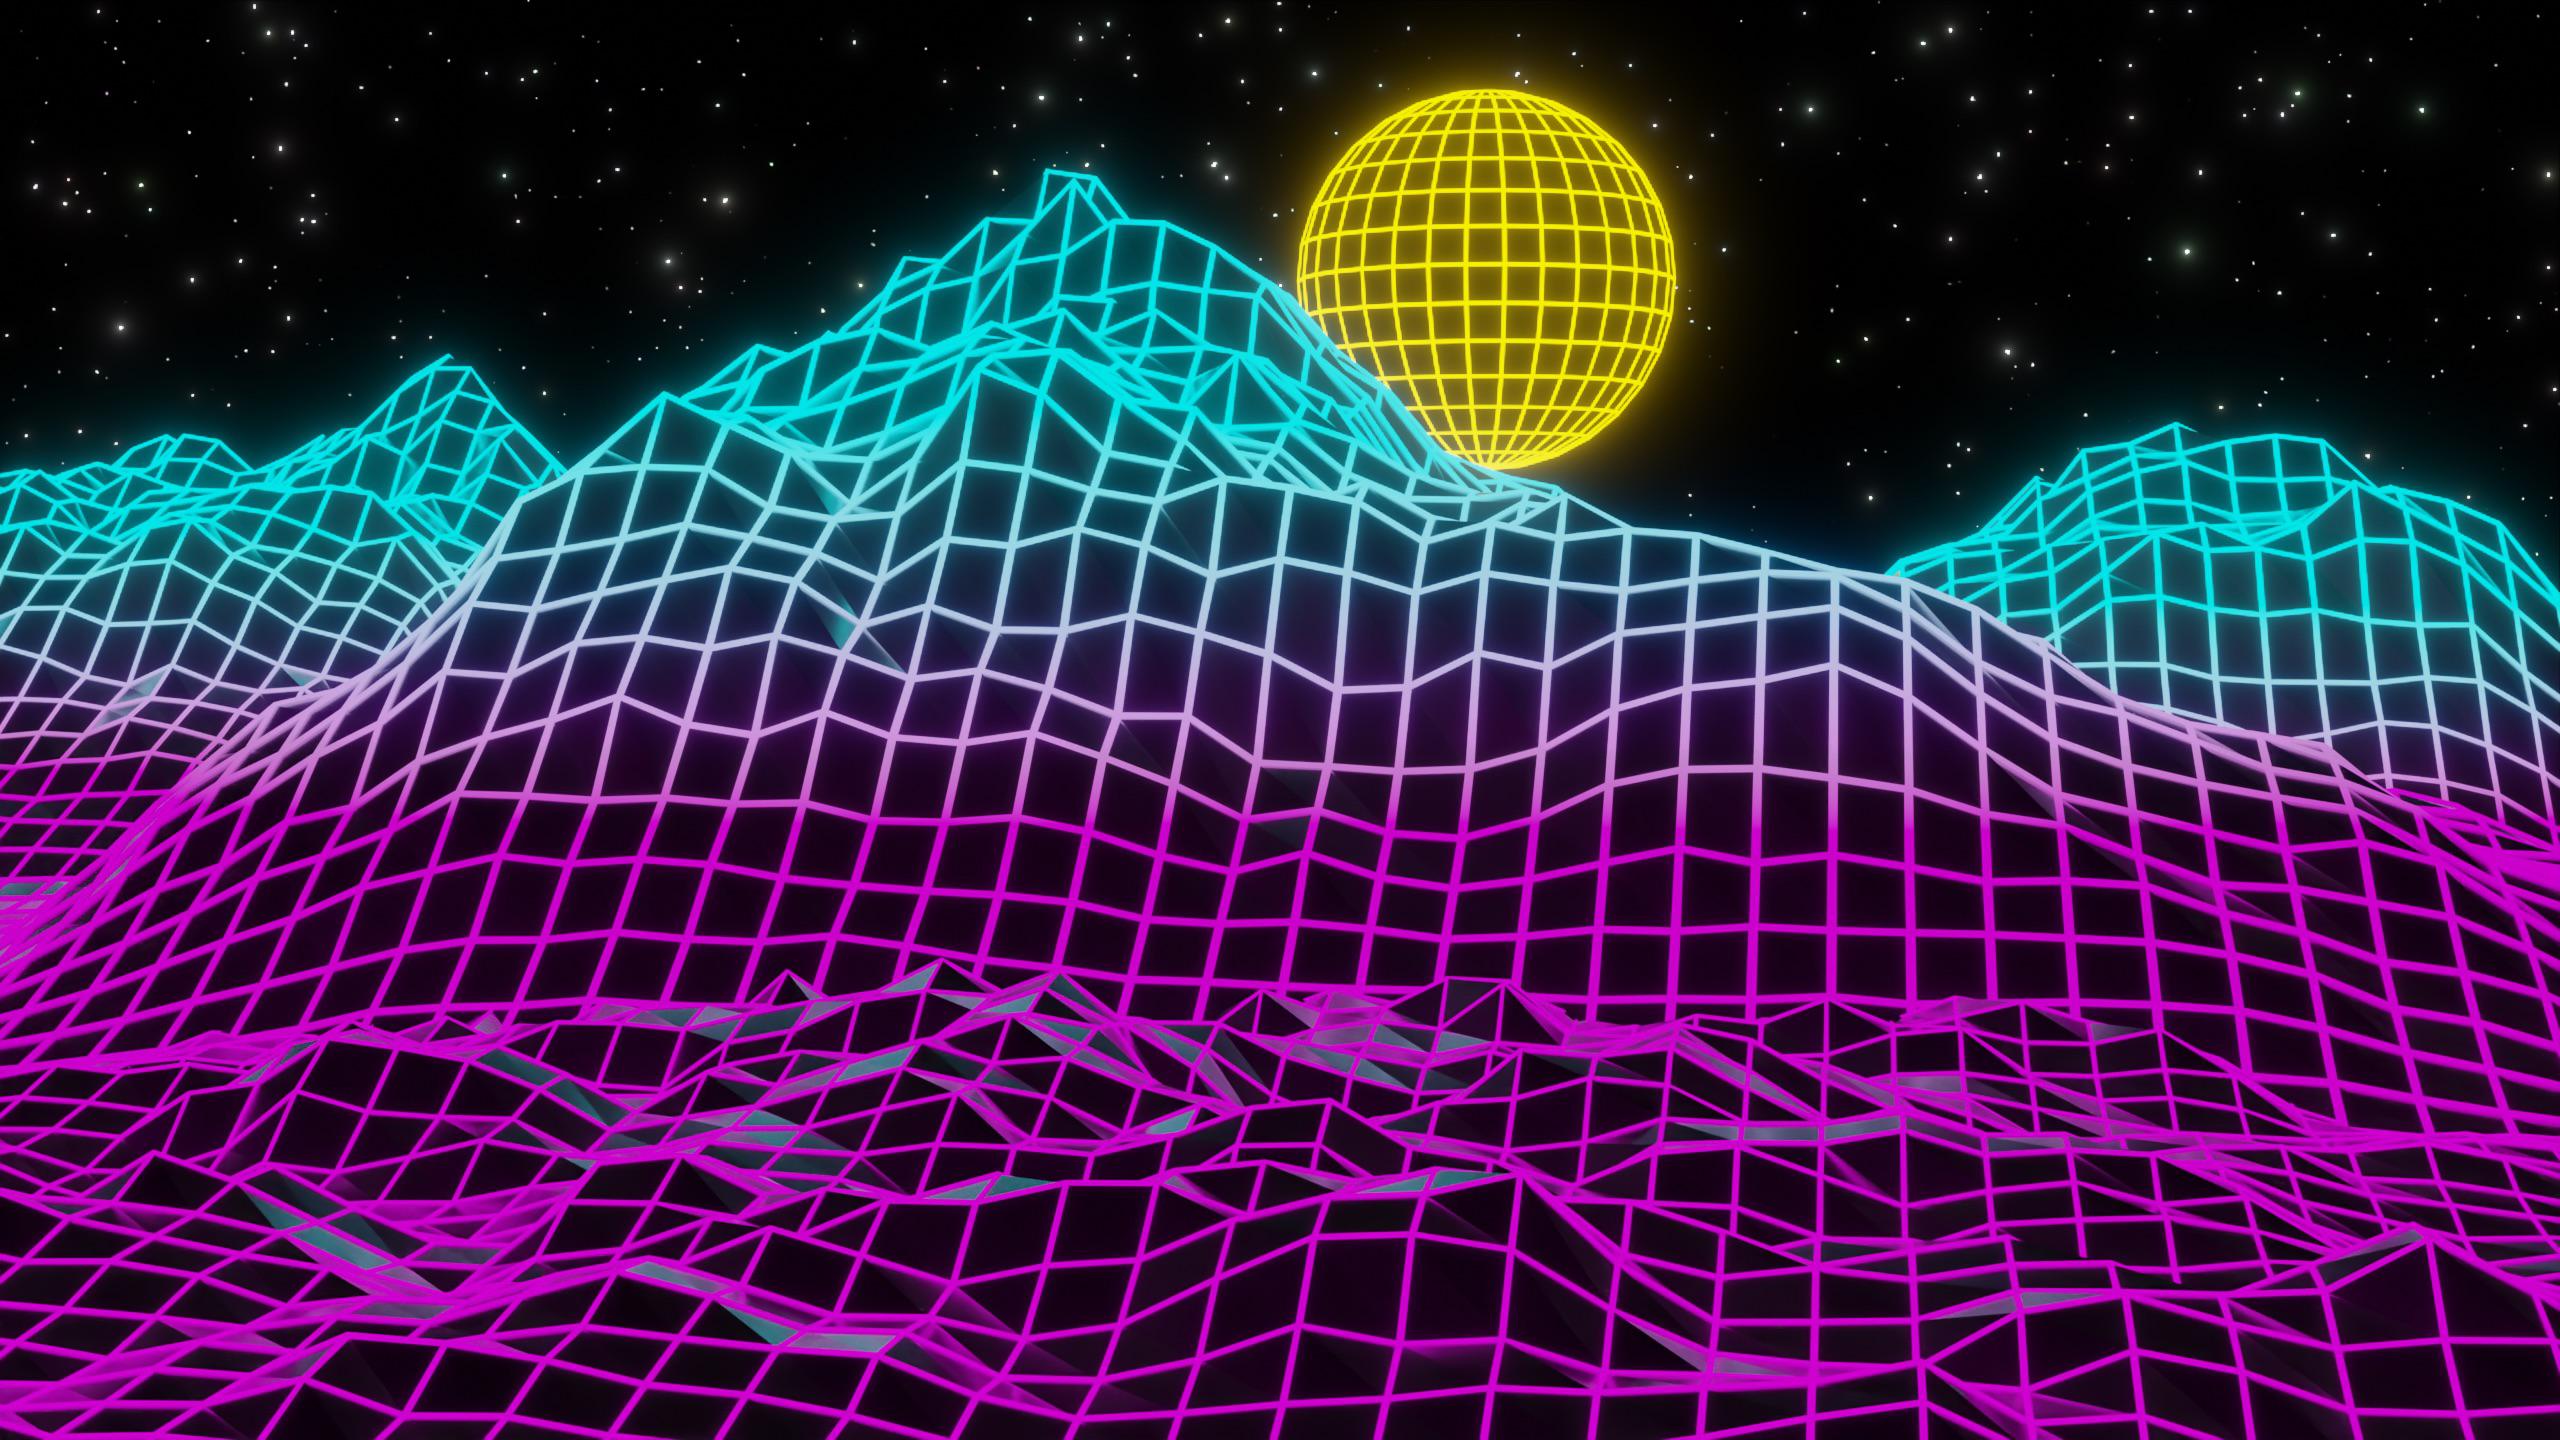 Neon Mountain Wallpapers